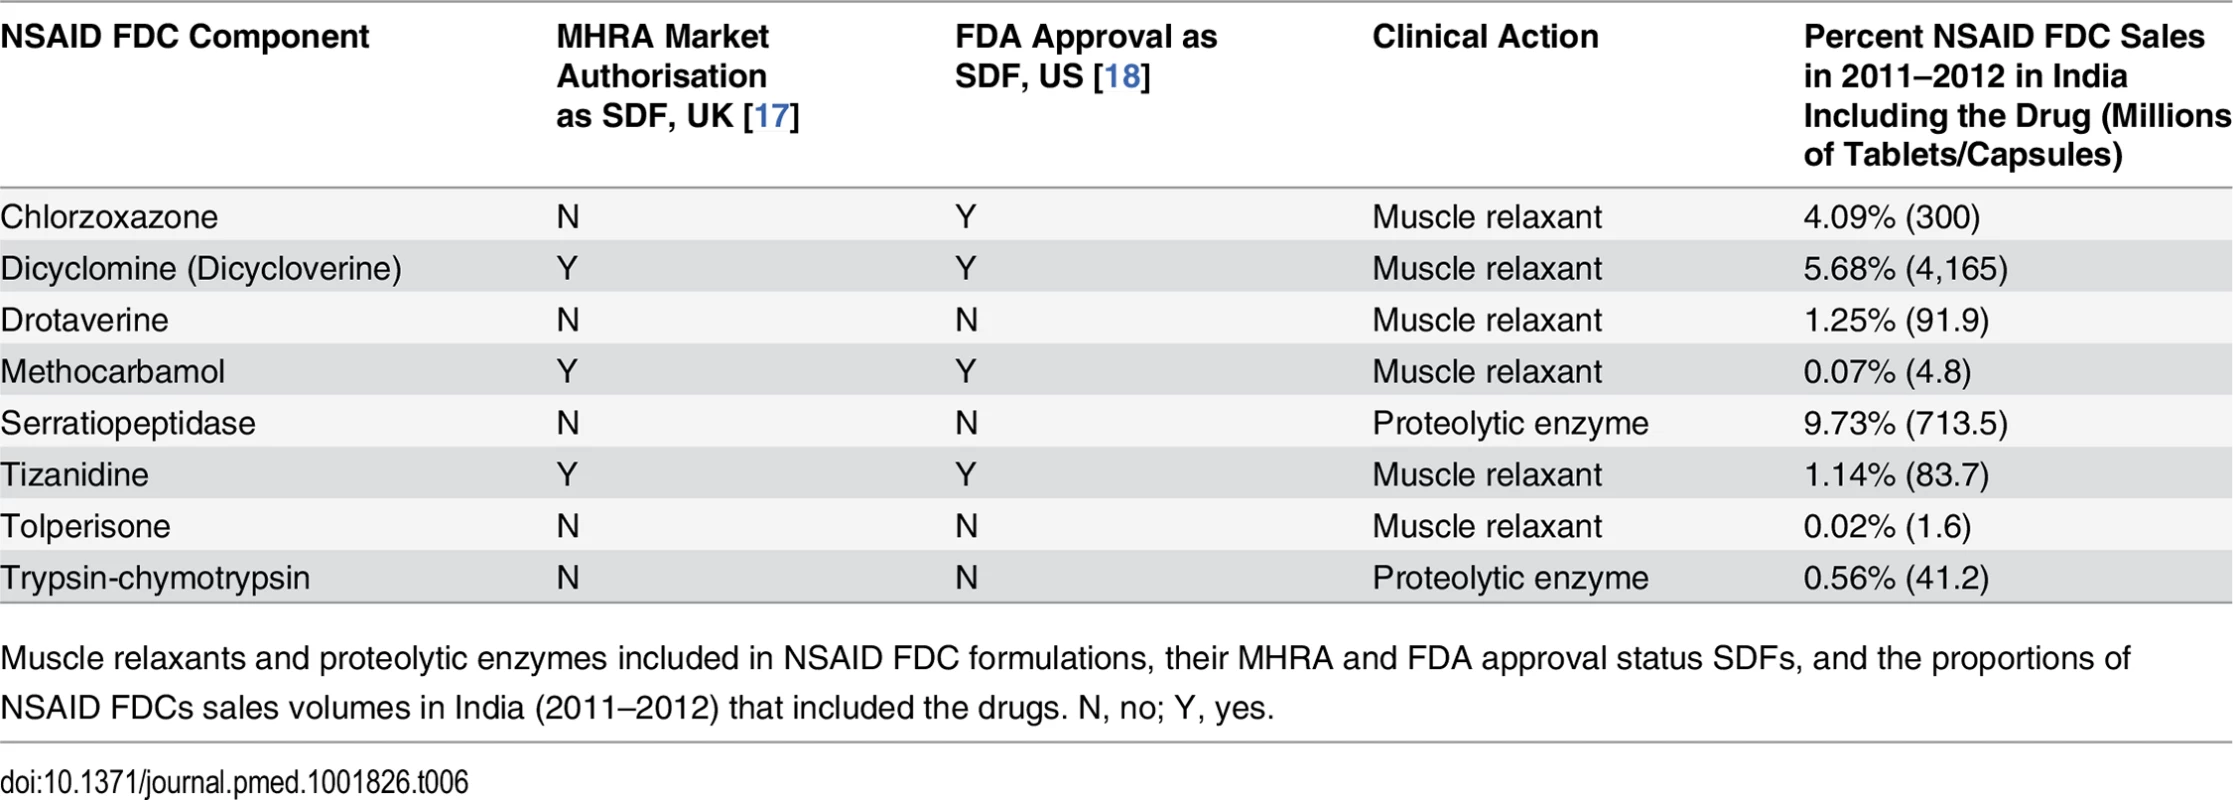 Muscle relaxants and proteolytic enzymes included in NSAID FDC formulations marketed in India.